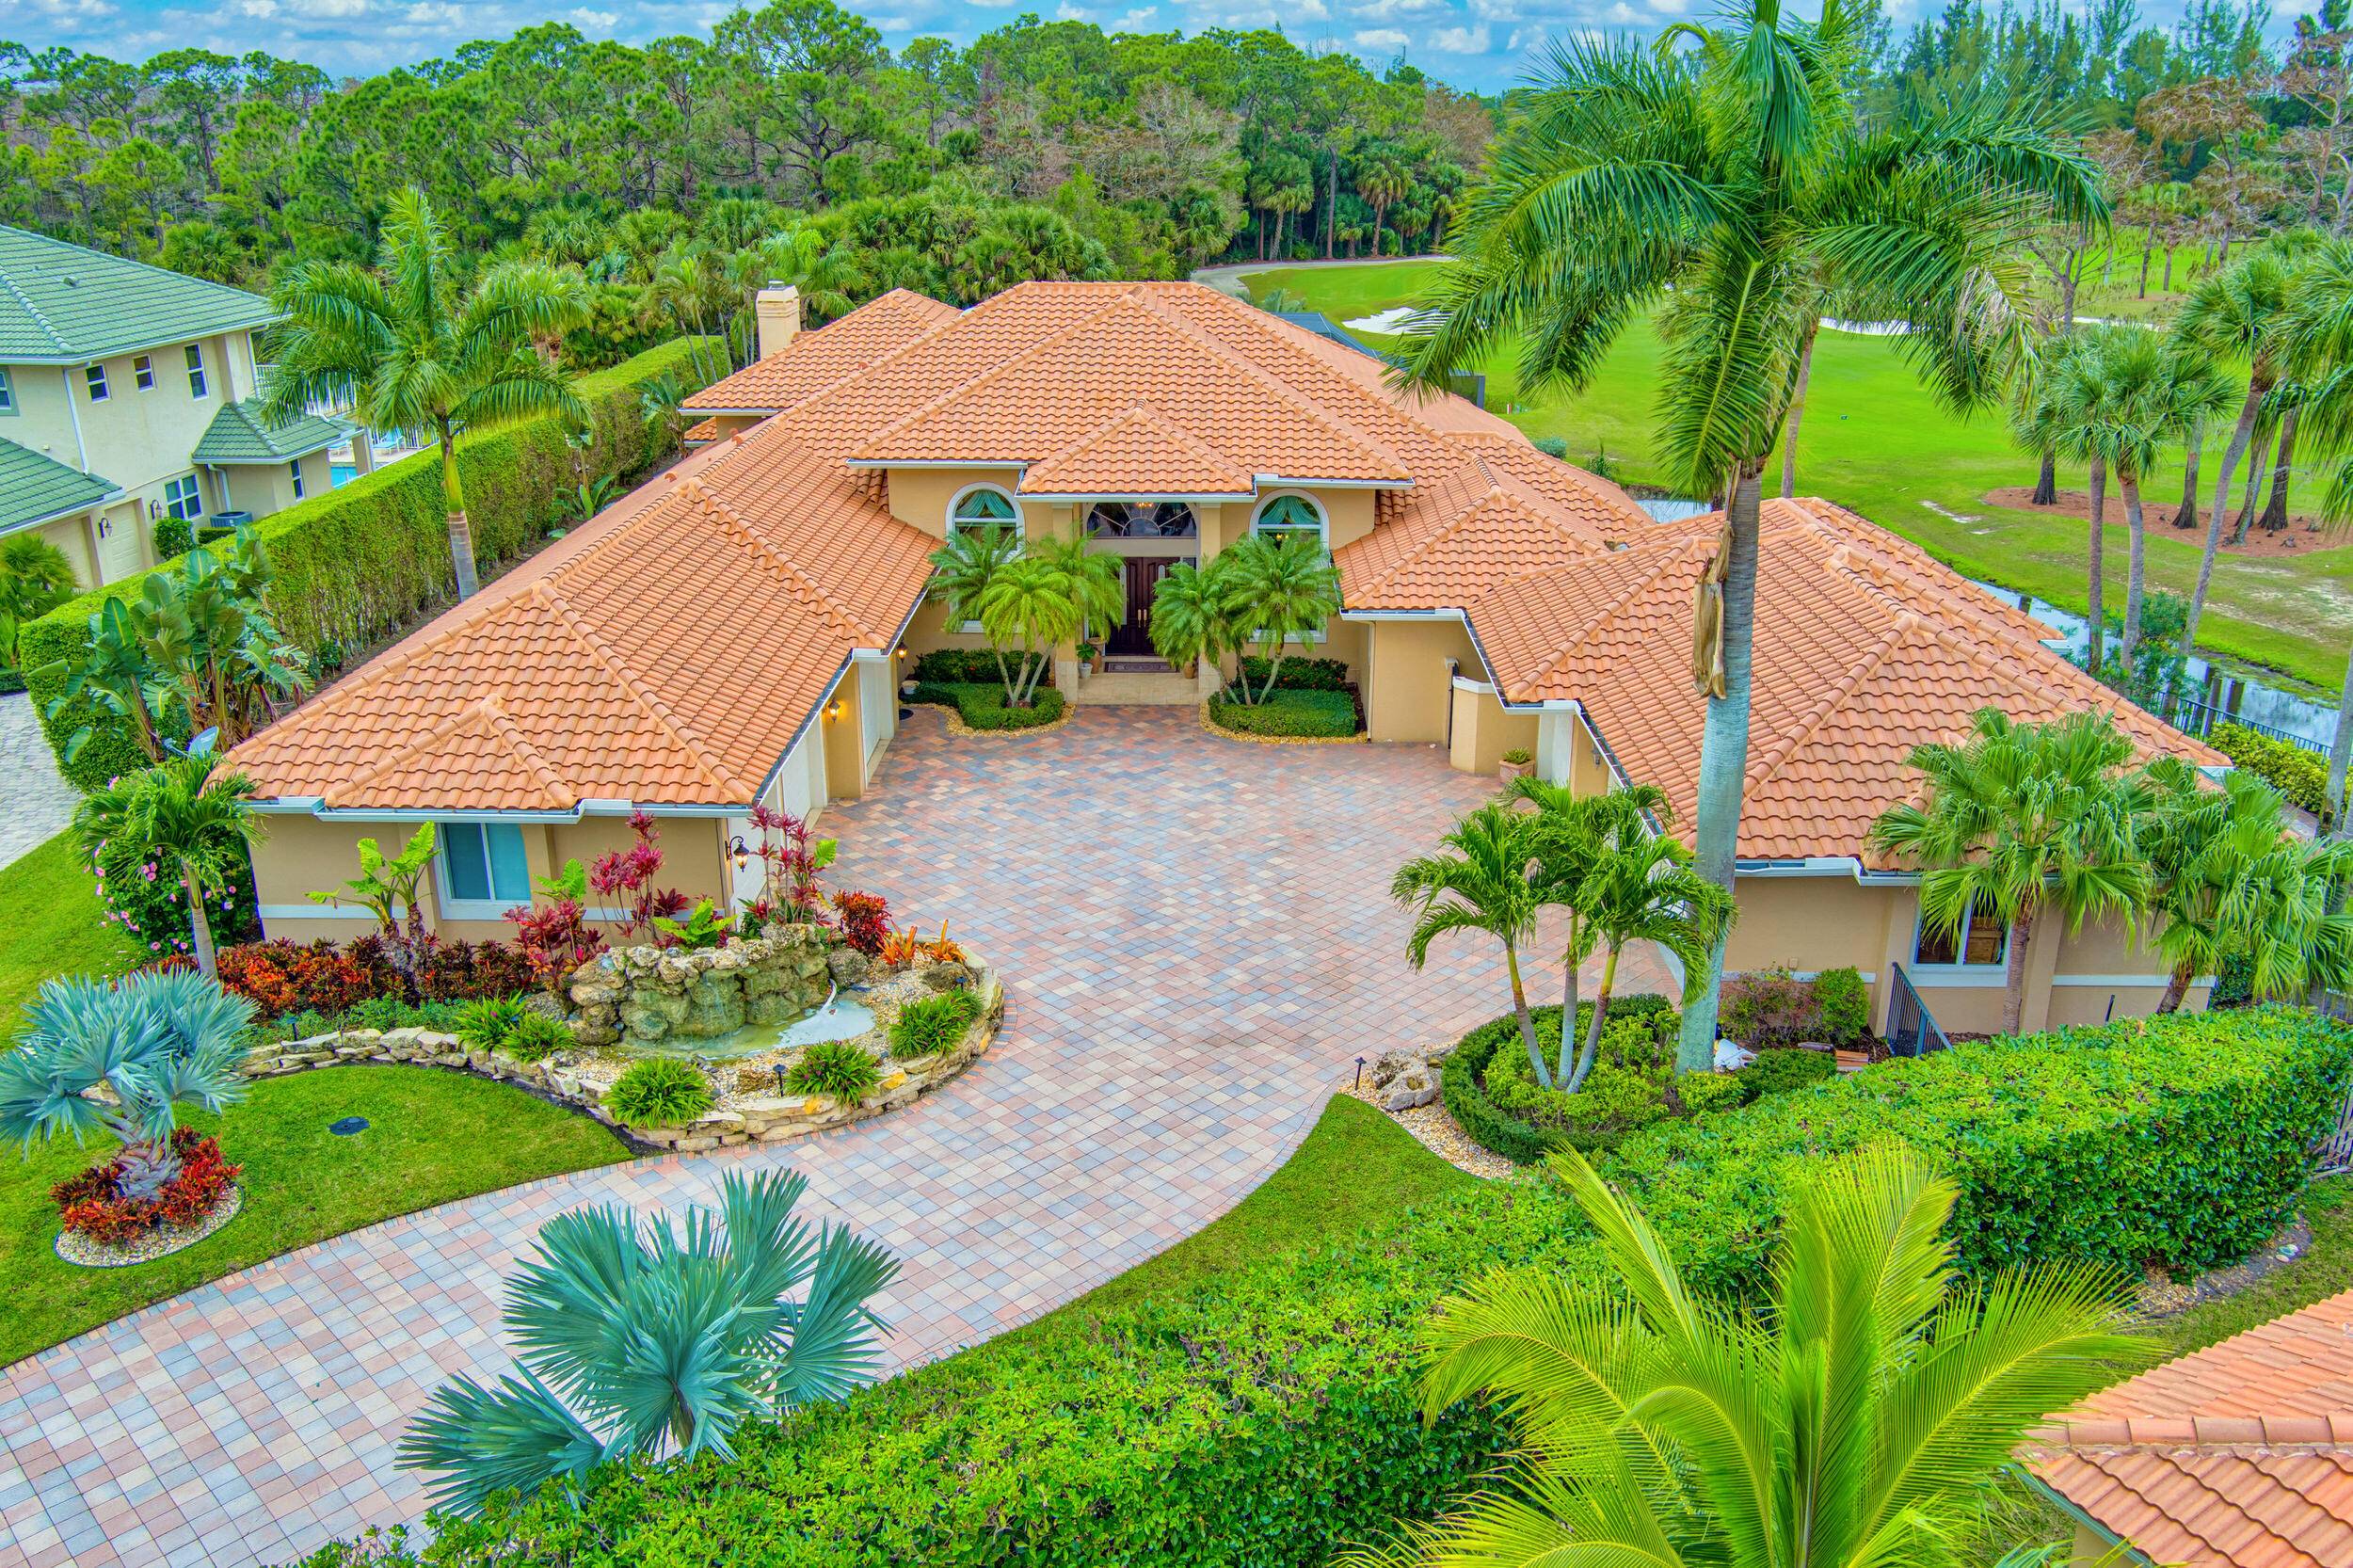 Welcome to 8472 Ironhorse Court situated on the 4th hole of The Preserve, a non mandatory Club with three levels of membership available to prospective new homeowners.